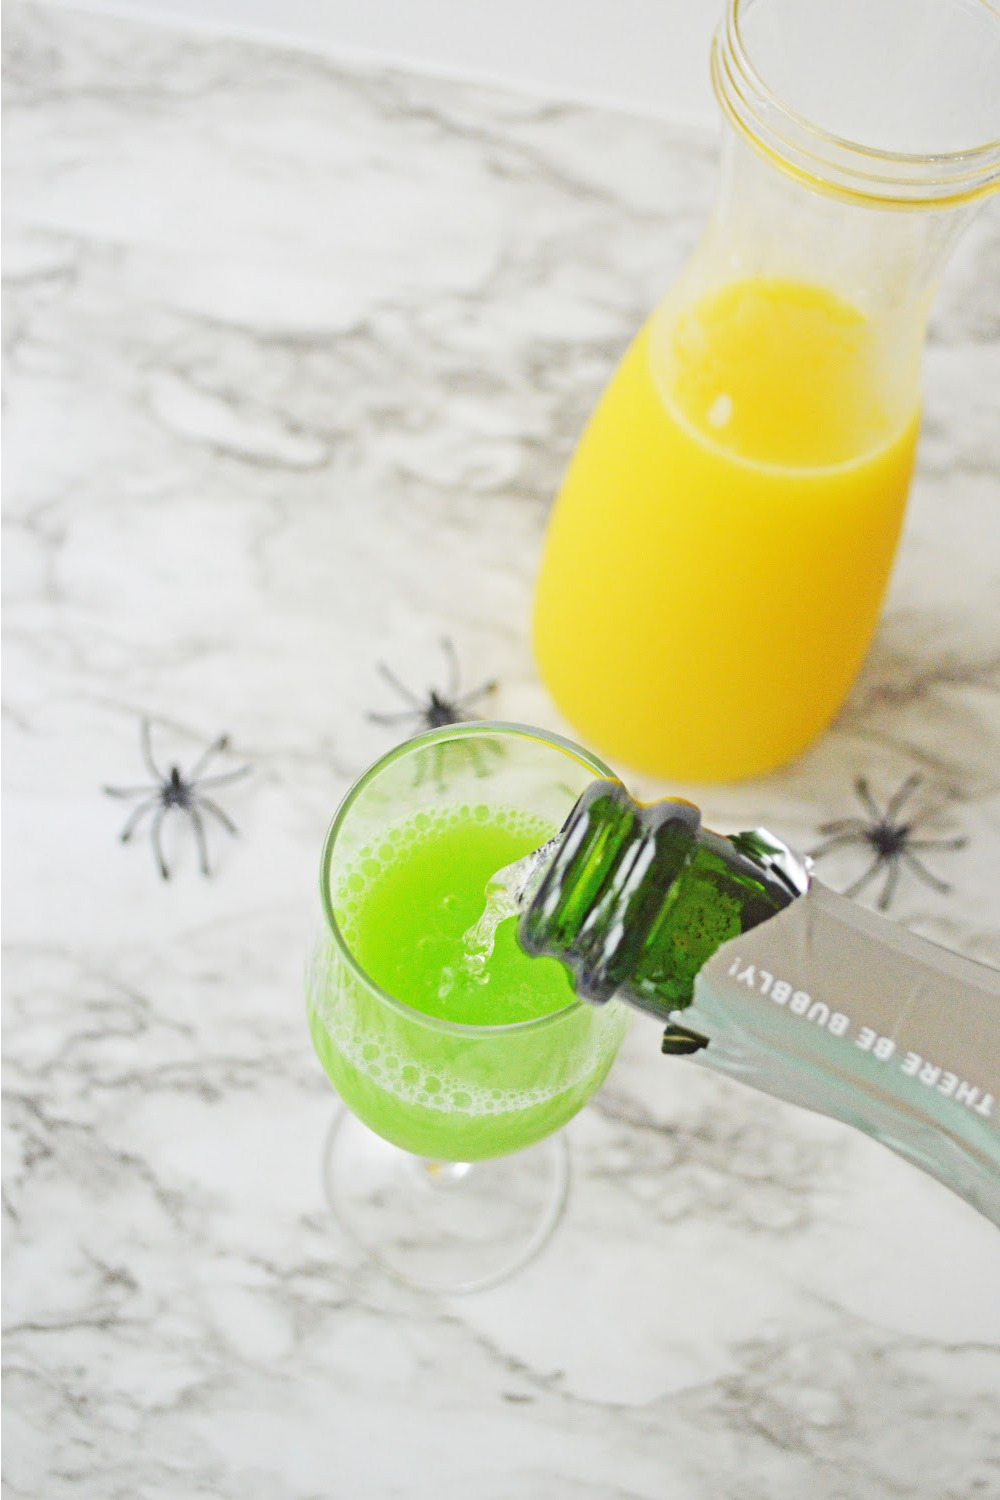 Pouring champagne into the glass that already has orange juice and blue Curacao in it for the Halloween Mimosas ingredients include champagne, orange juice and blue Curacao. These ingredients are displayed on a gray and white marble background with black plastic spiders.